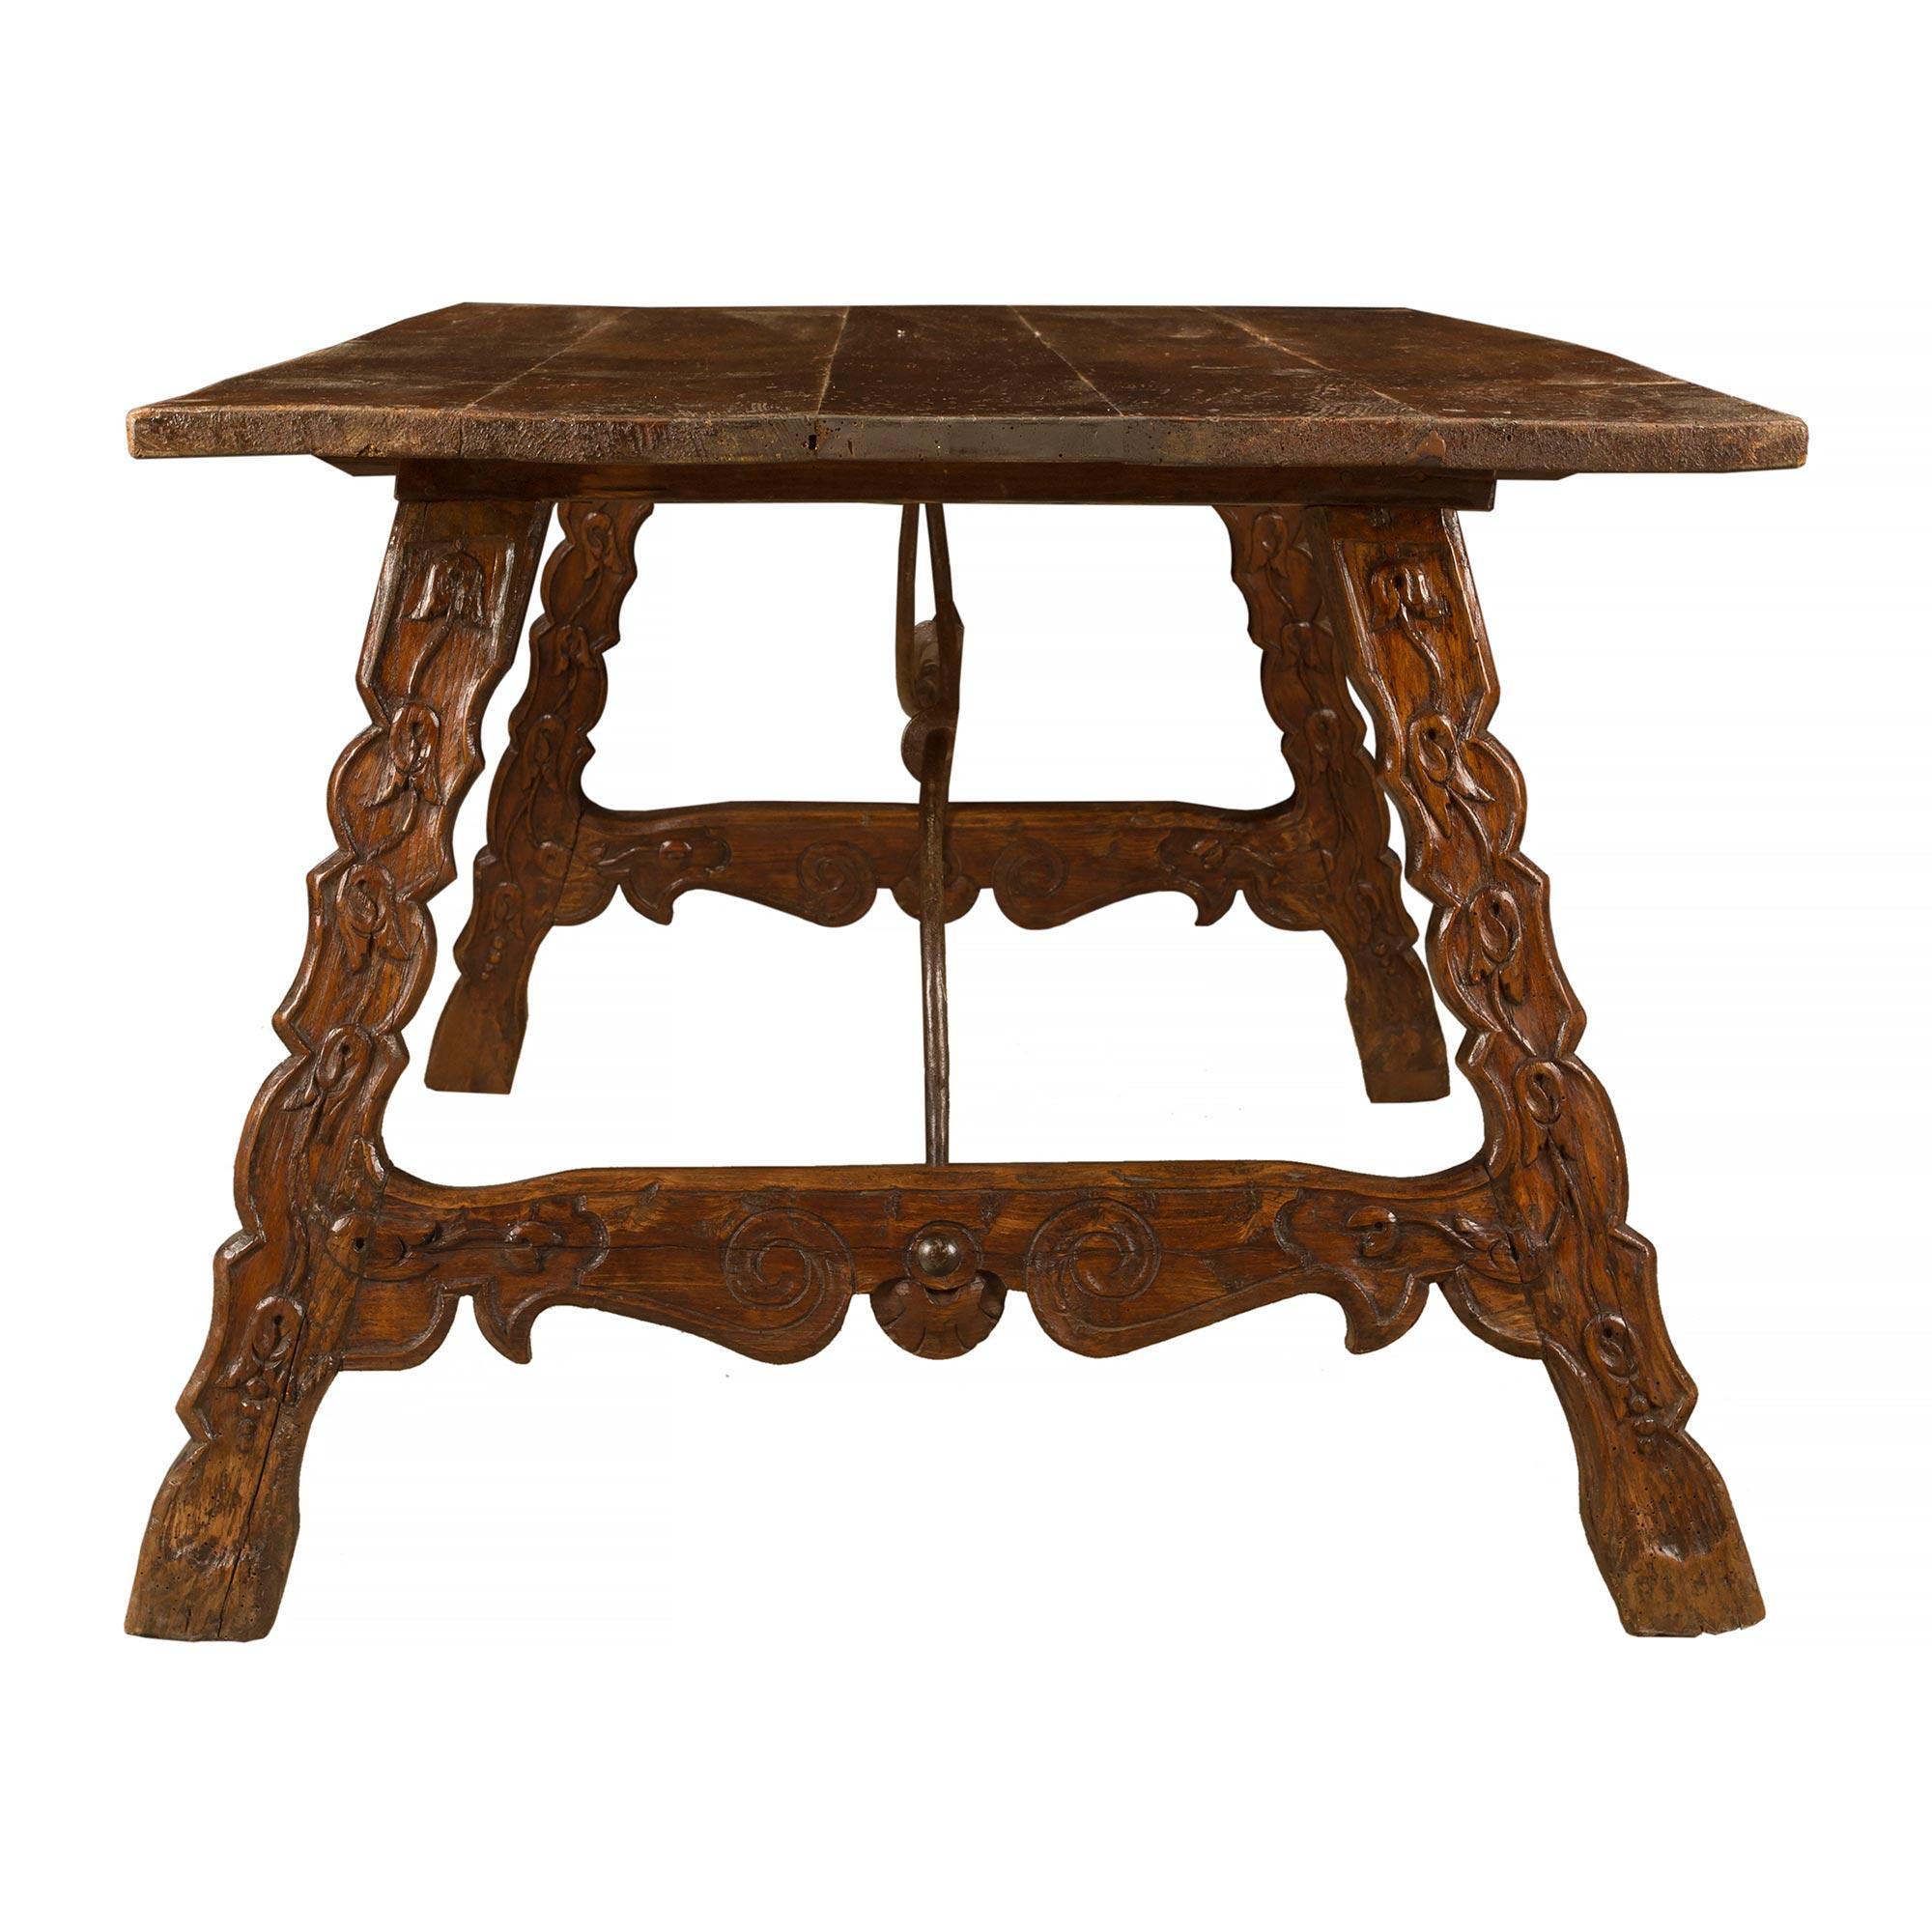 Wrought Iron Spanish Mid-19th Century Country Dining/Center Table in Dark Patinated Oak For Sale